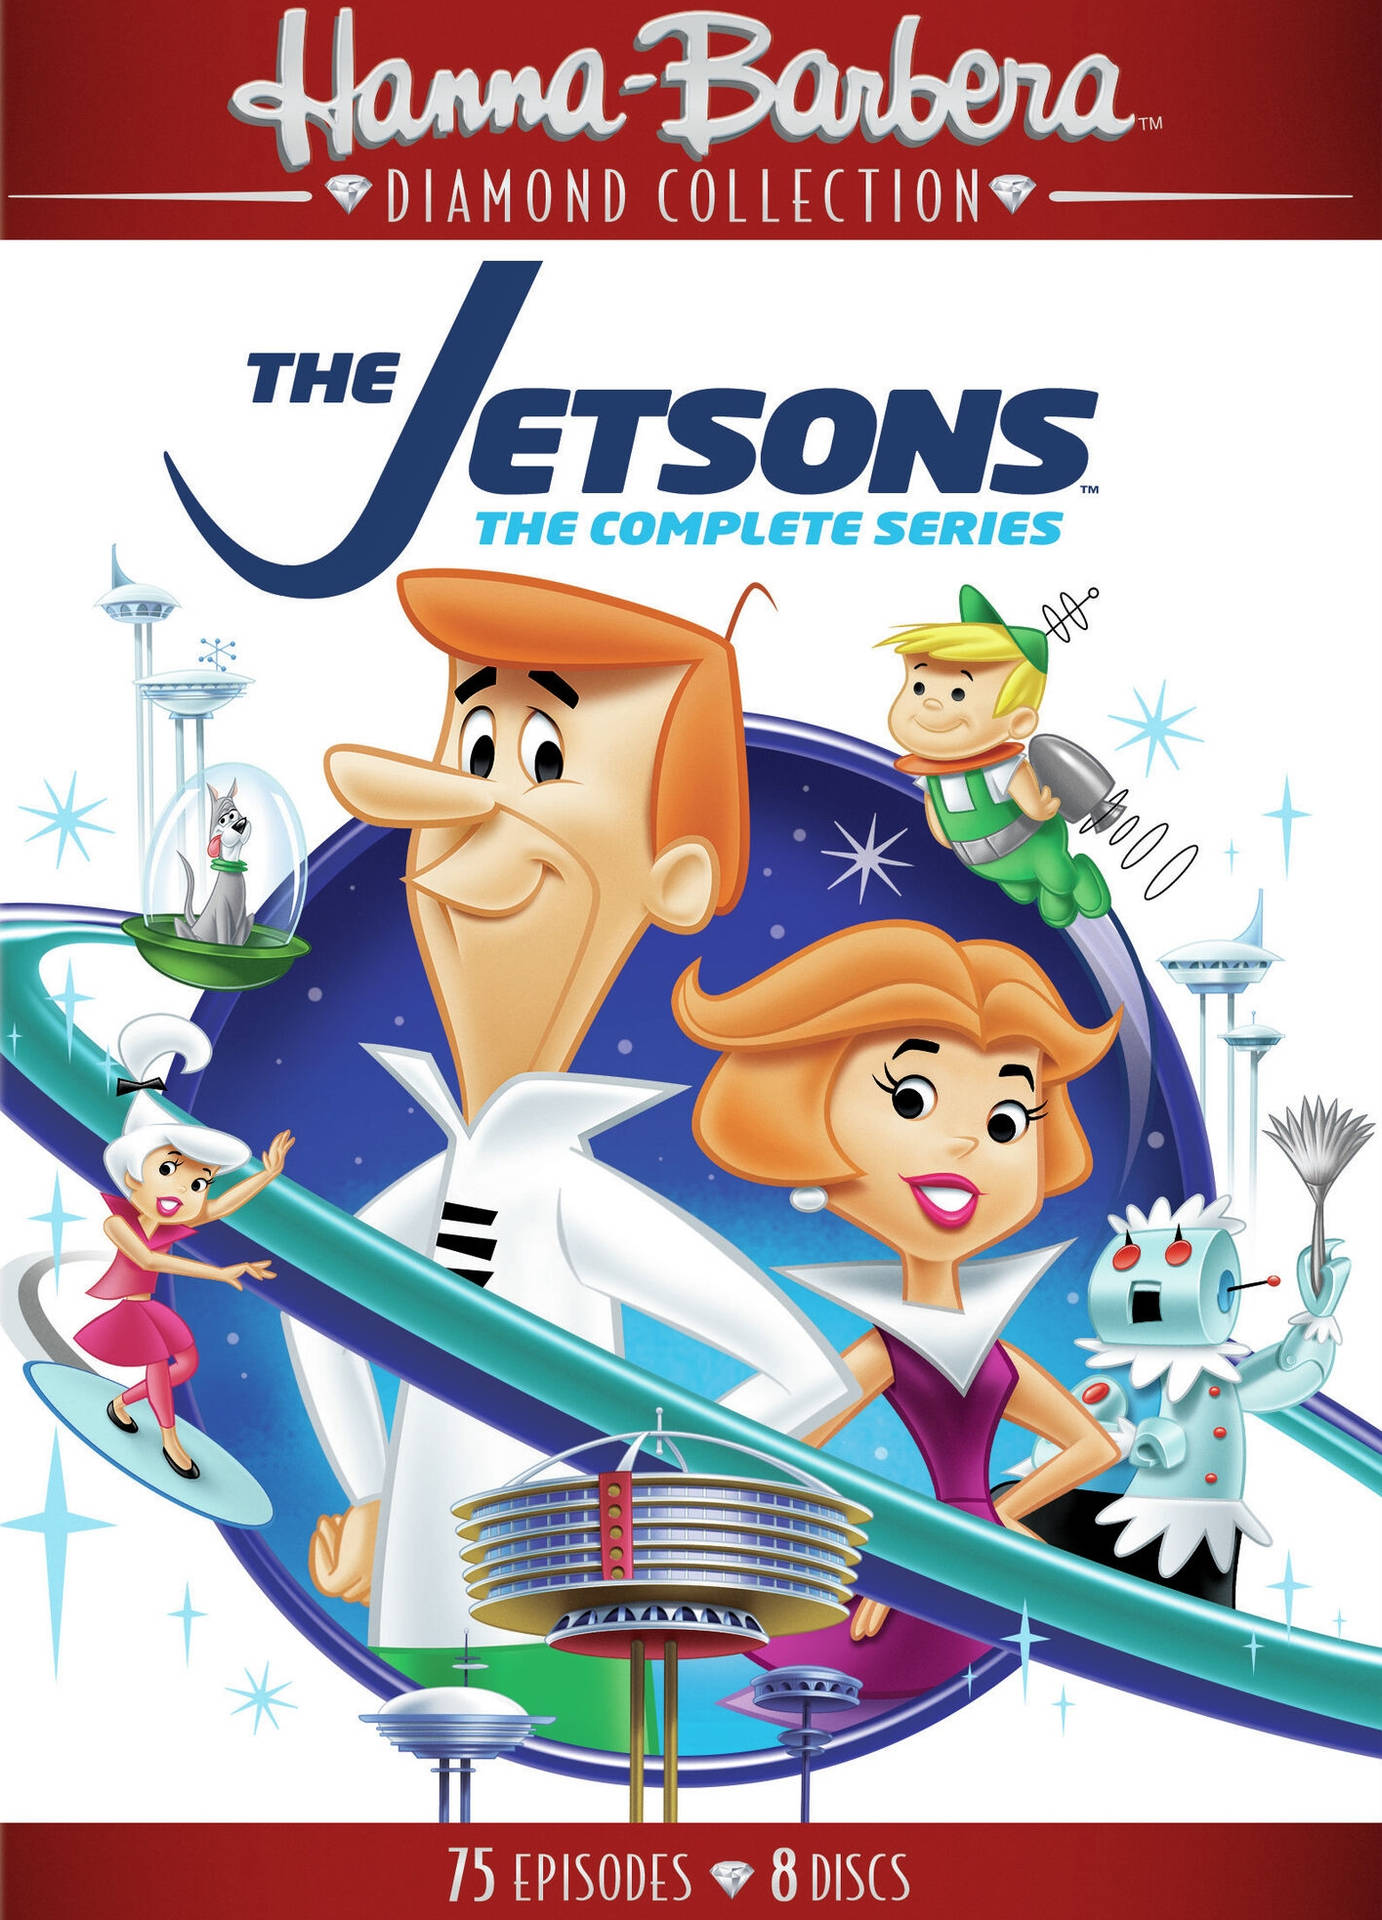 Hanna-Barbera The Jetsons Collection Wallpaper